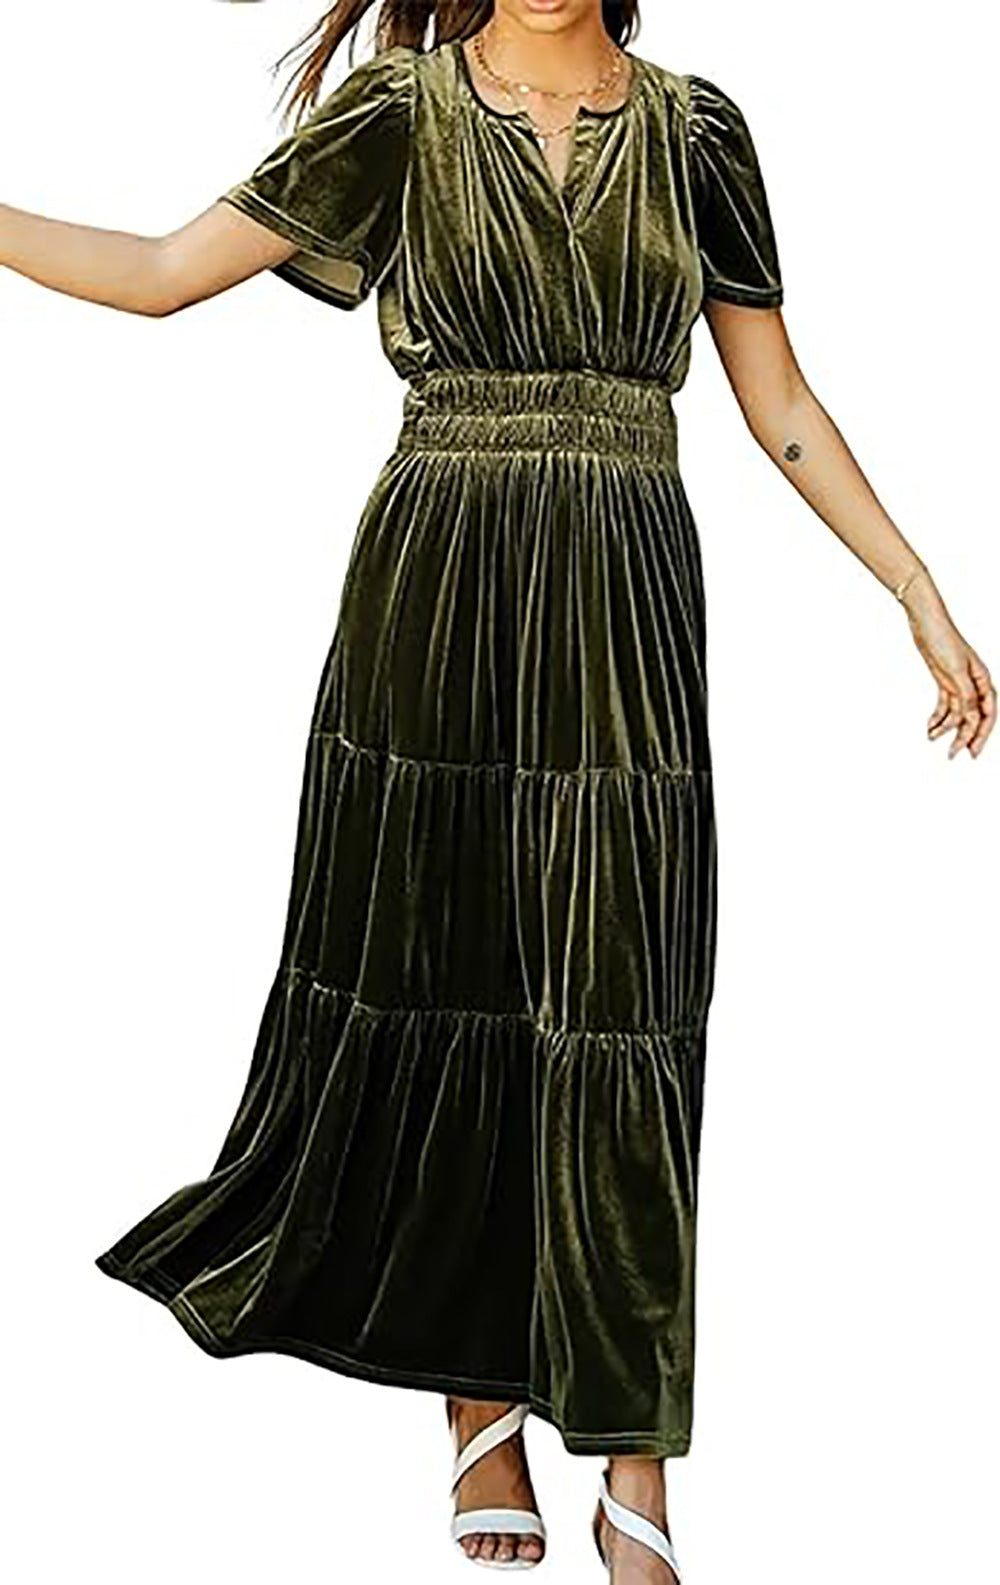 💃Women‘s Velvet Tiered Maxi Dress - Early Christmas Sale 49% OFF (Free Shipping)